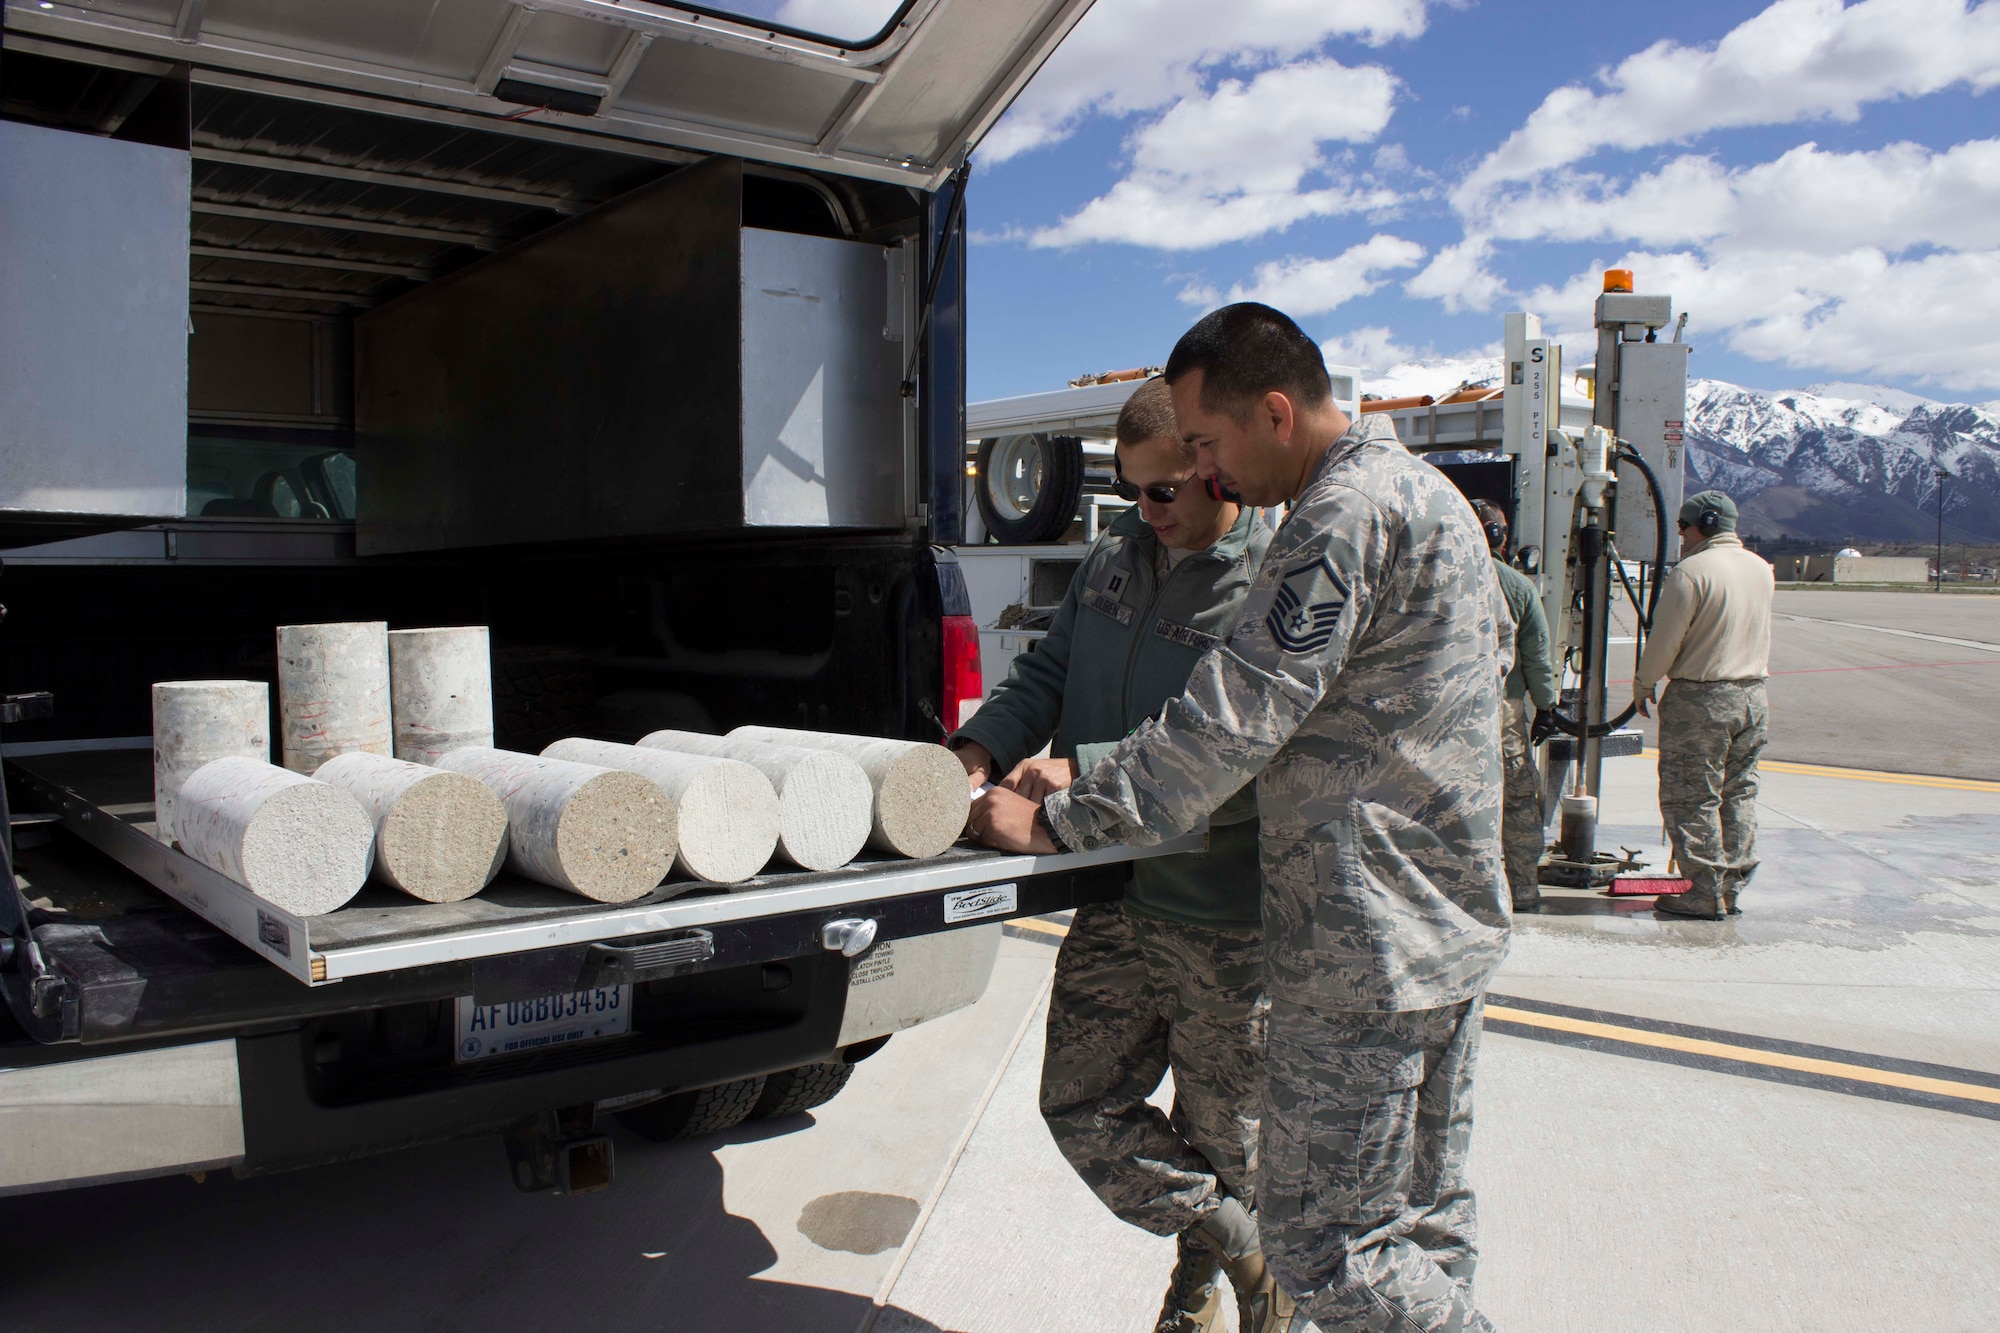 Air Force Civil Engineer Center Airfield Pavement Evaluation, or APE, Team members conduct an air field pavement evaluation in April 2016 at Hill AFB, Utah.